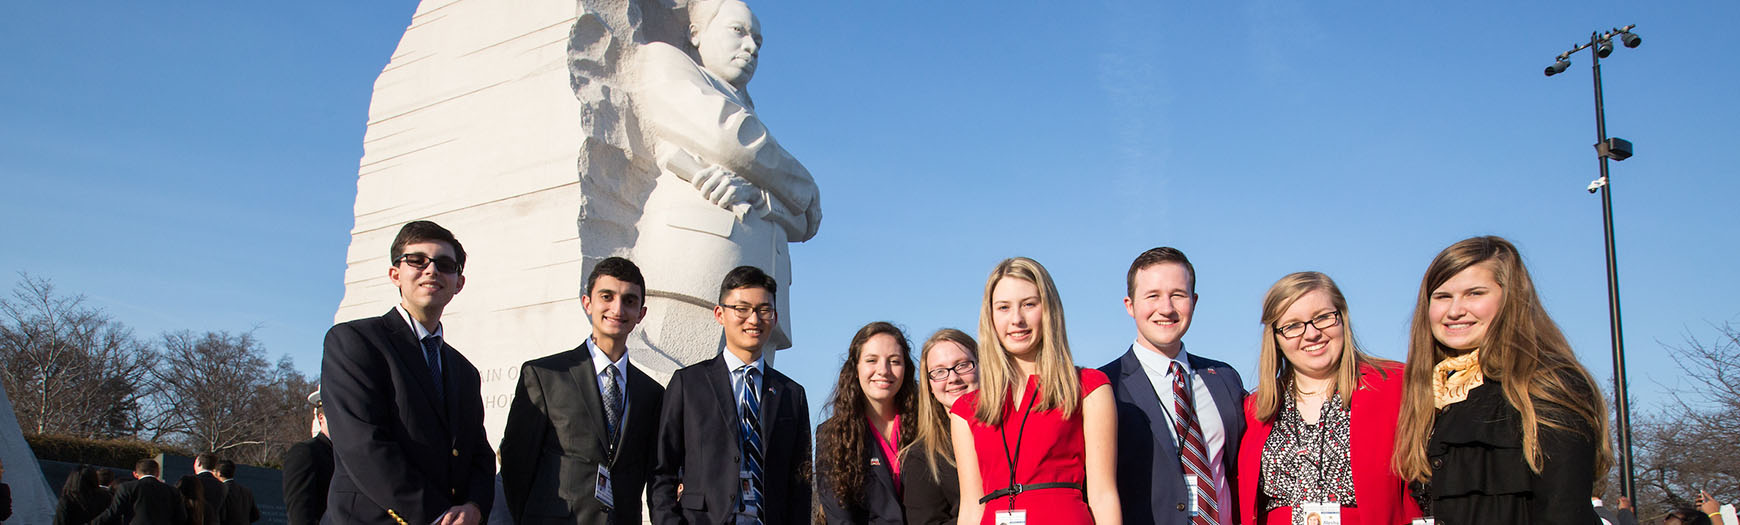 Senate Youth delegates in front of the Martin Luther King, Jr. Memorial, Washington, DC